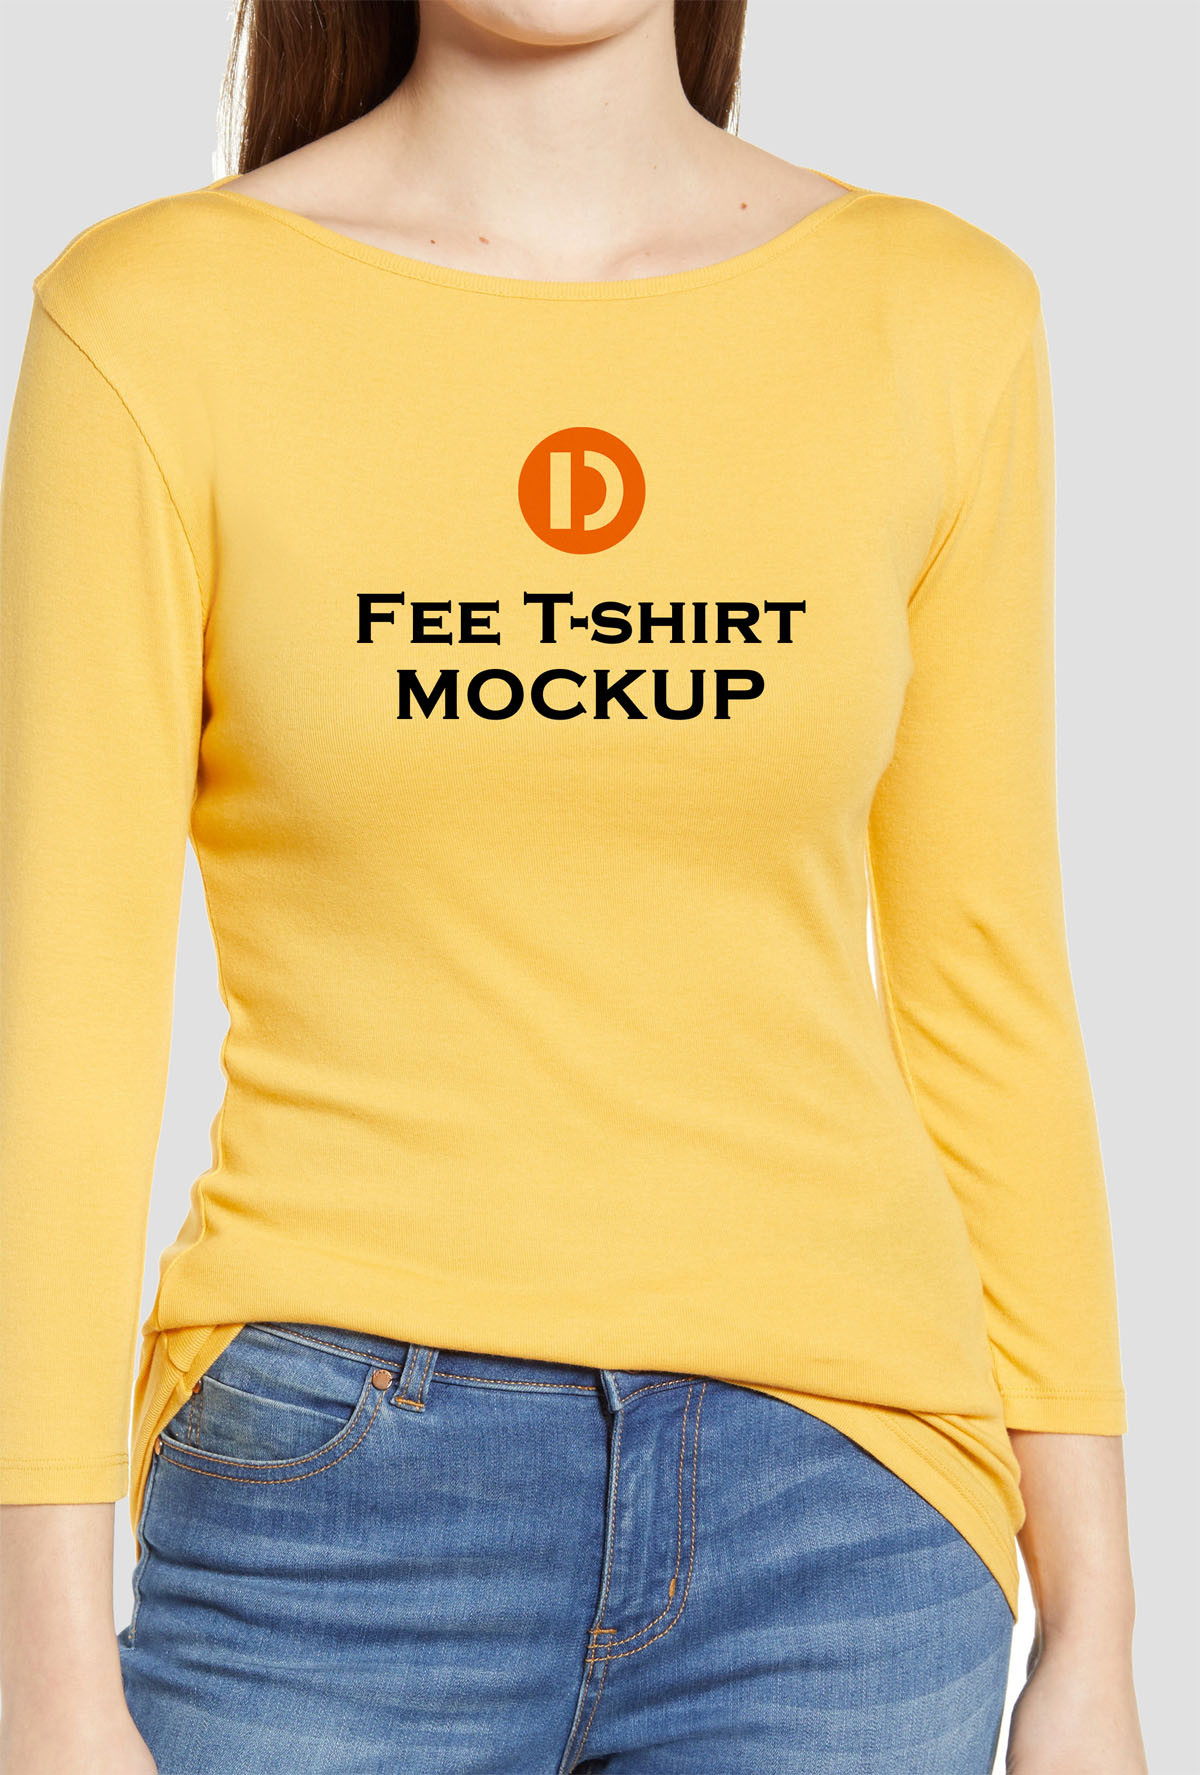 Download Free Woman T-Shirt Mockup - Find the Perfect Creative Mockups Freebies to Showcase your Project ...